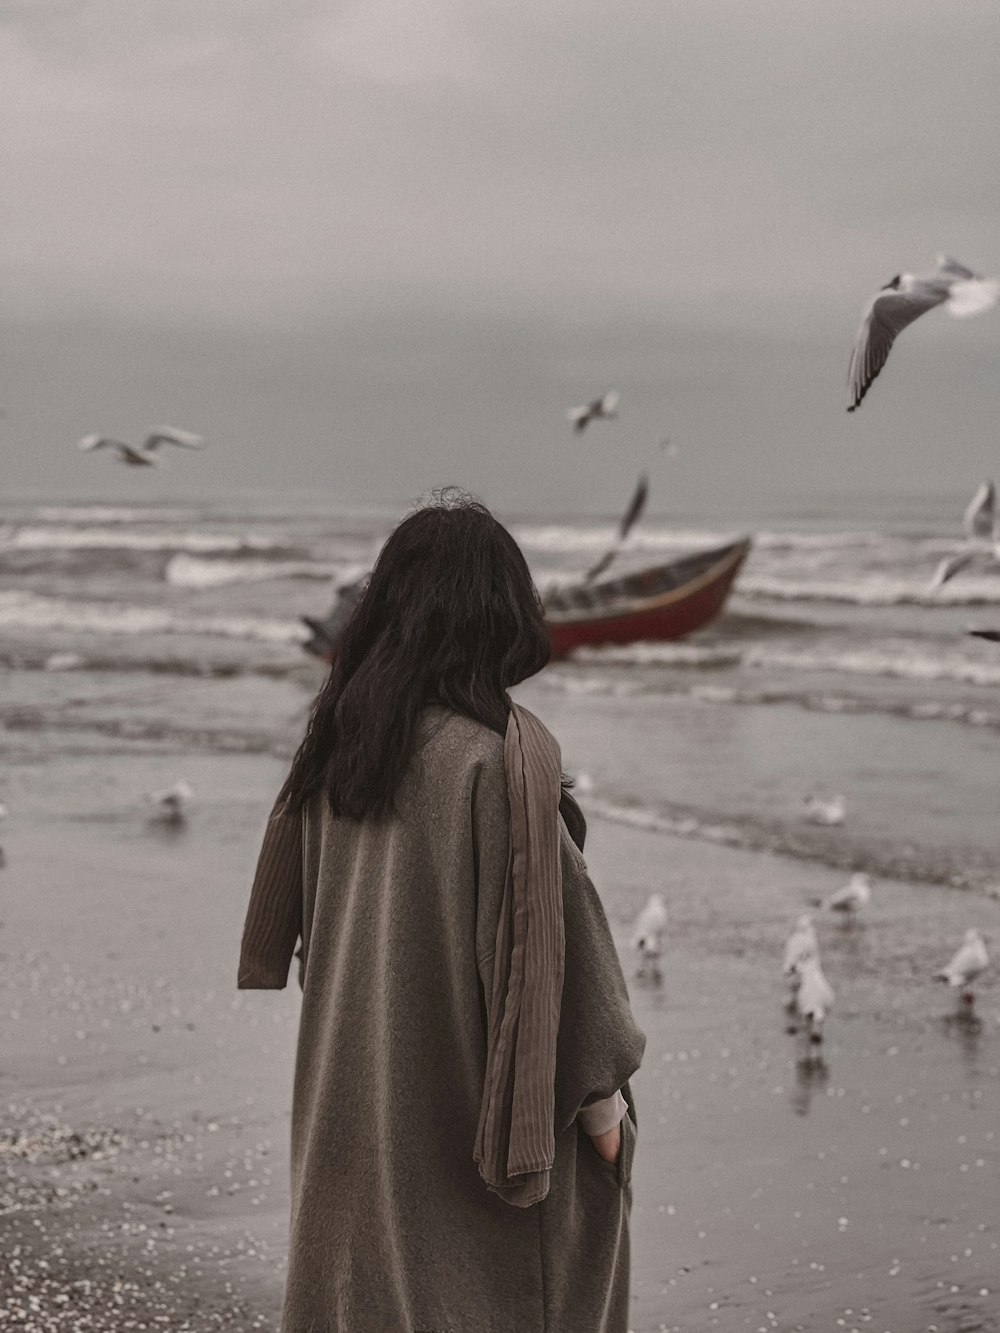 a woman standing on a beach looking at seagulls